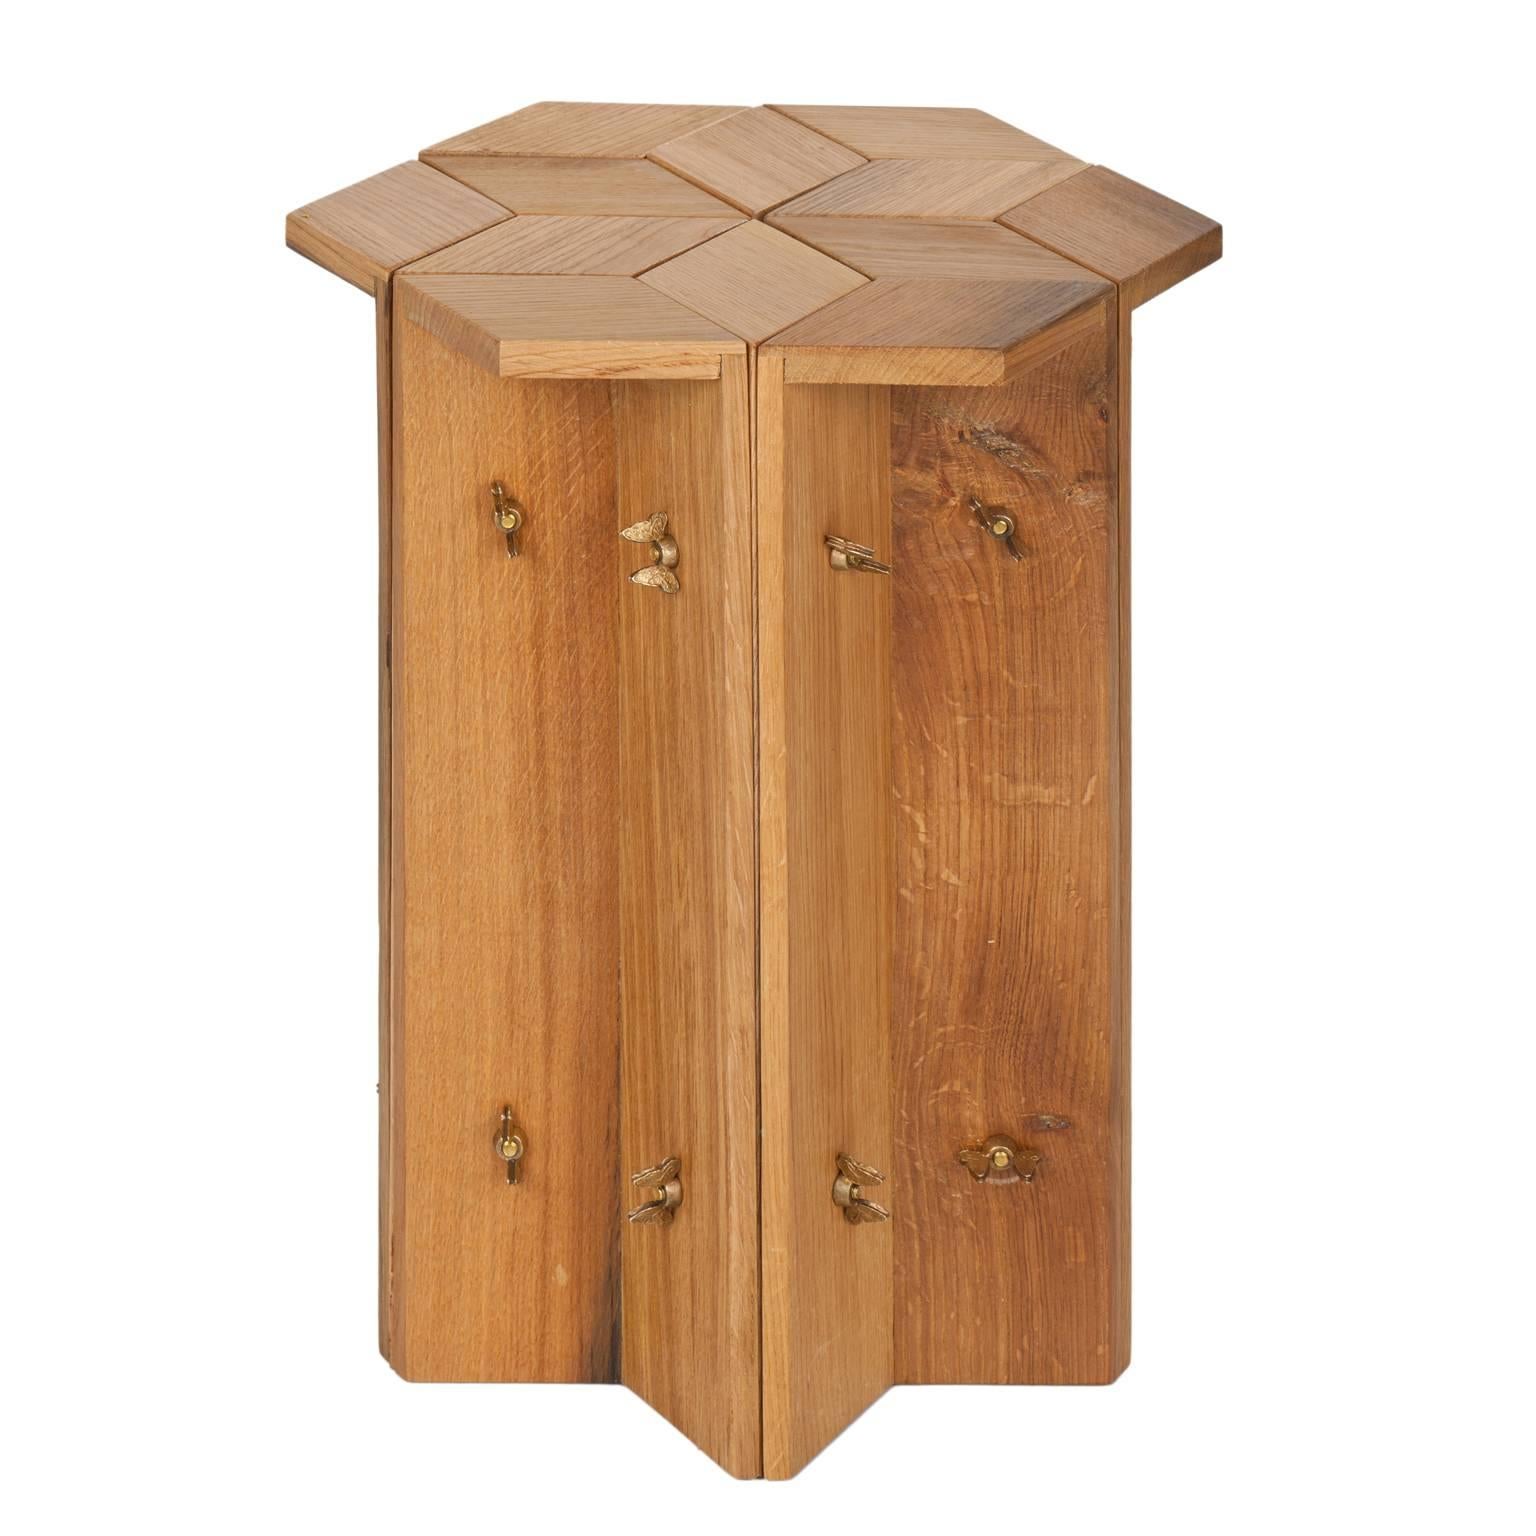 Mike Hexagonal Stool or Side Table in Reclaimed Oak with Butterfly Wingnuts For Sale